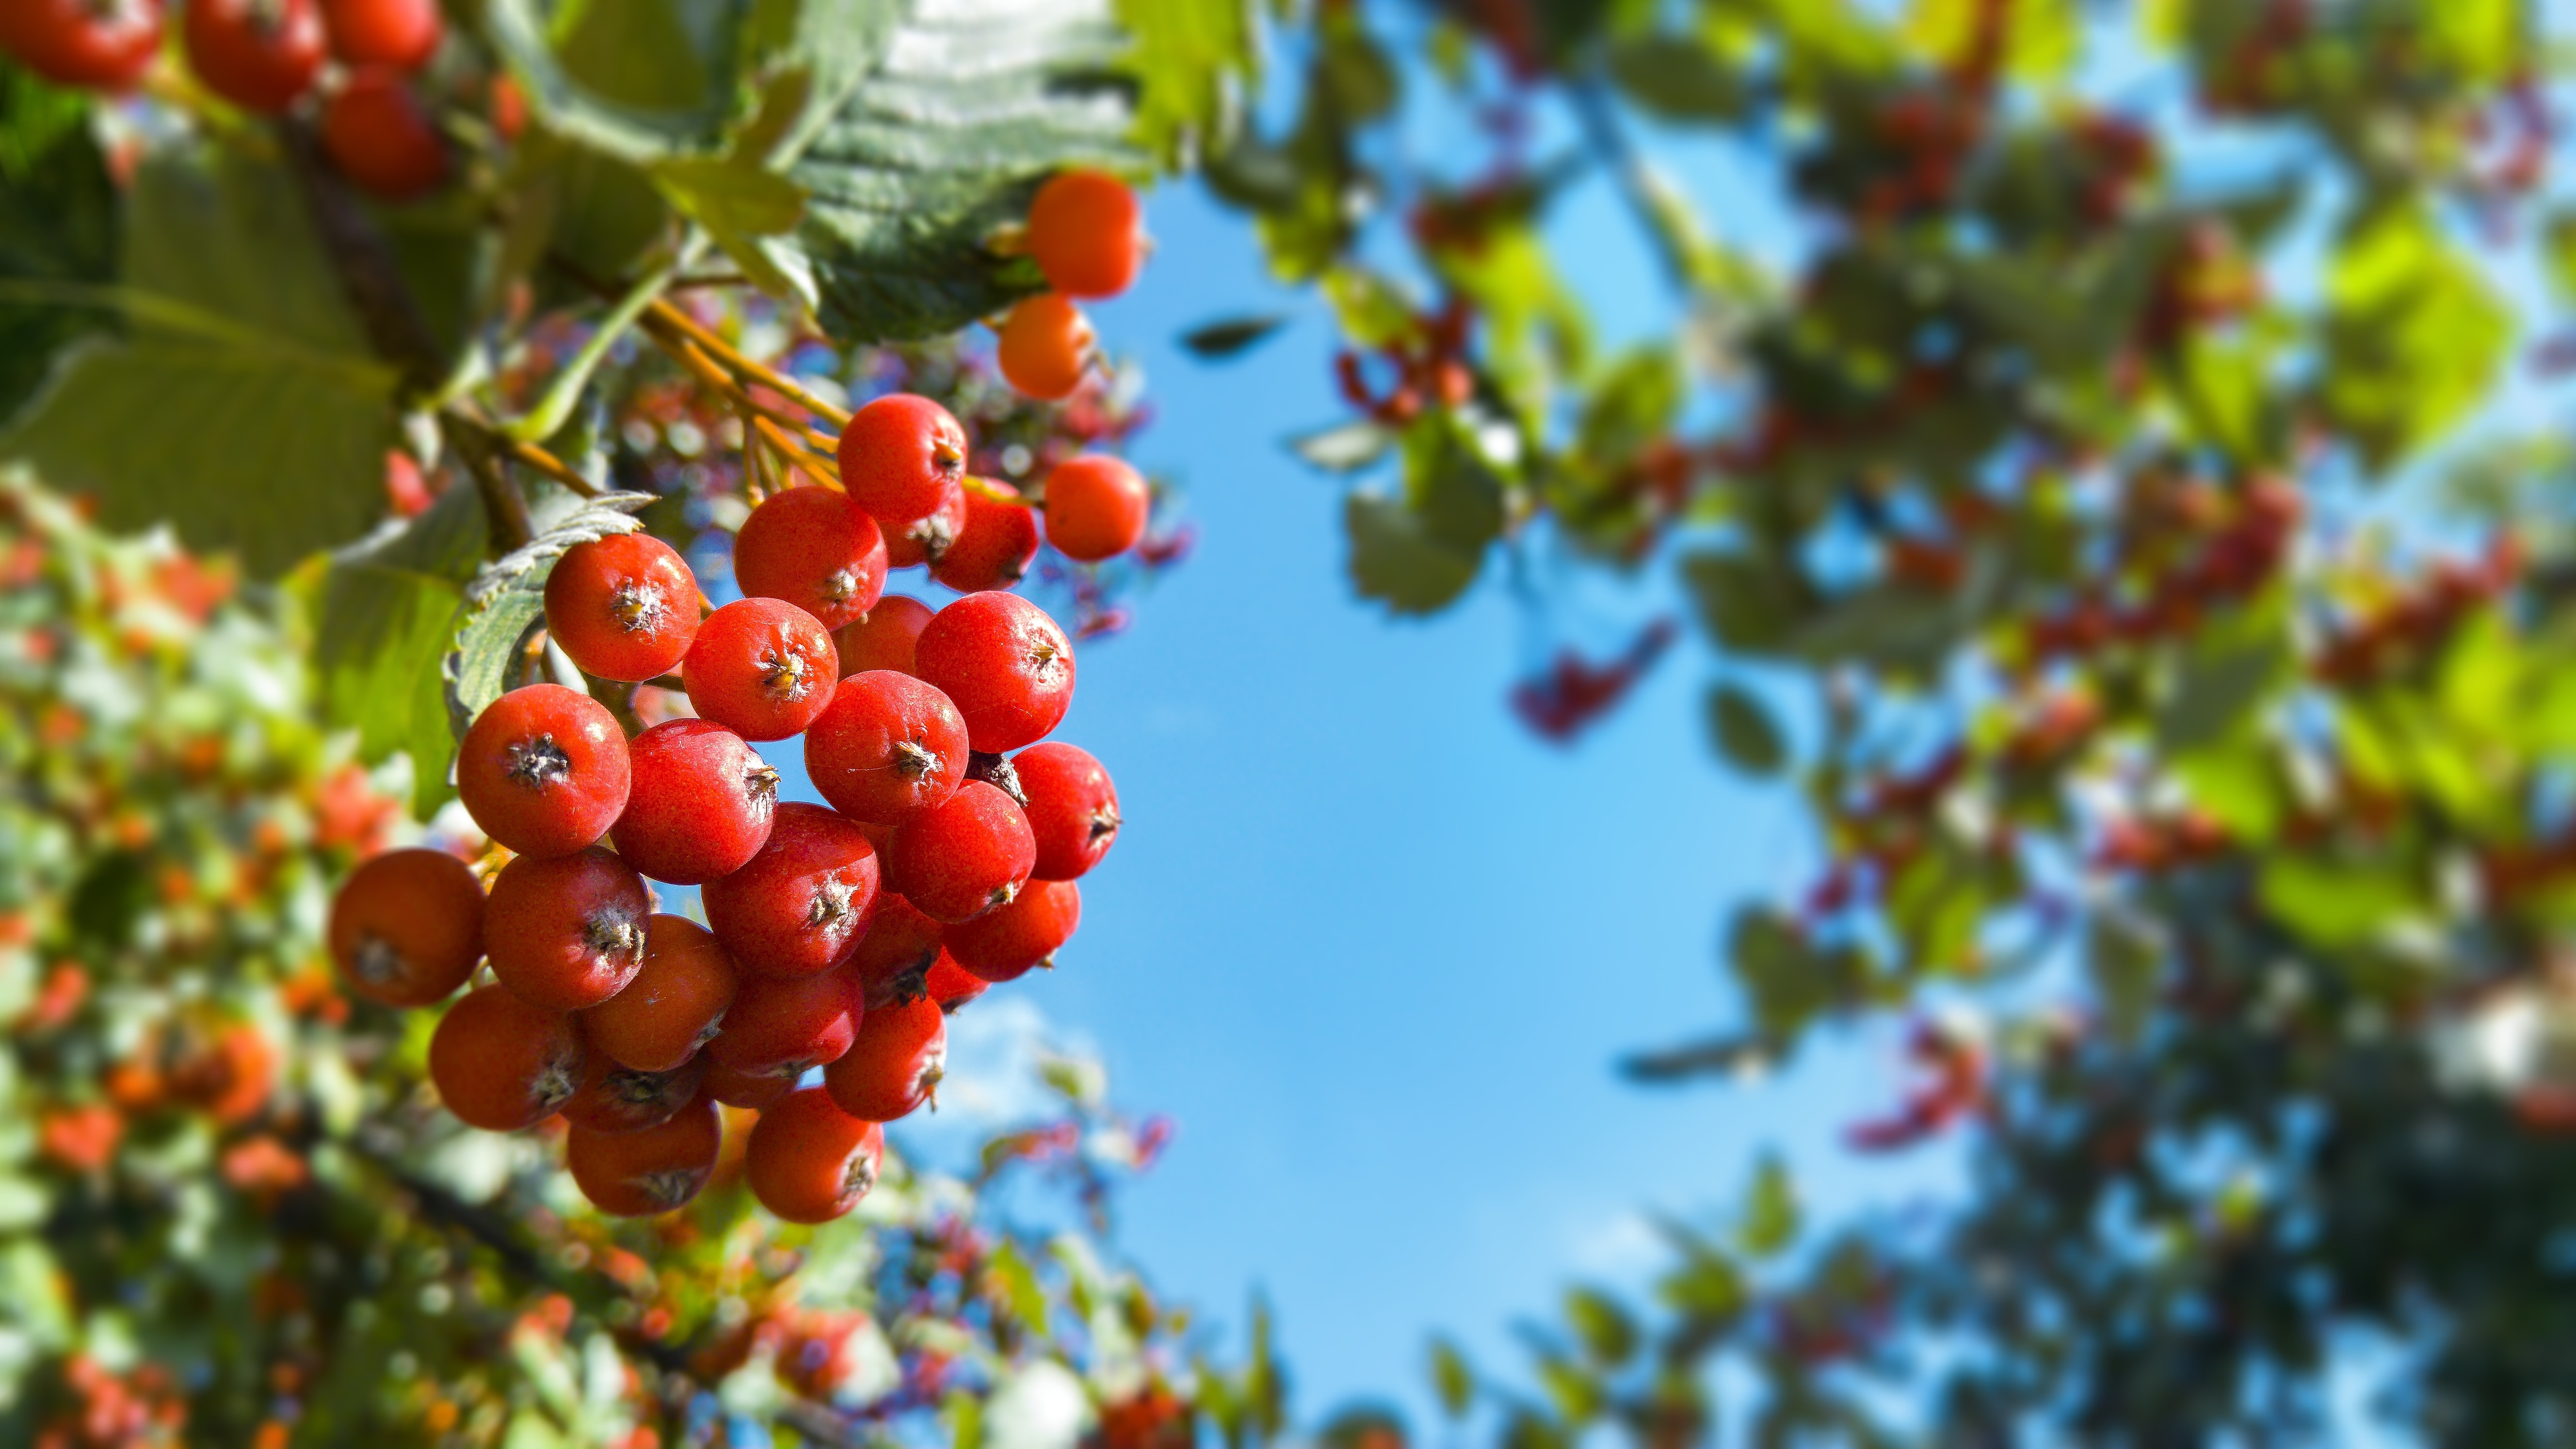 tilt shift lens photo of round red small fruits